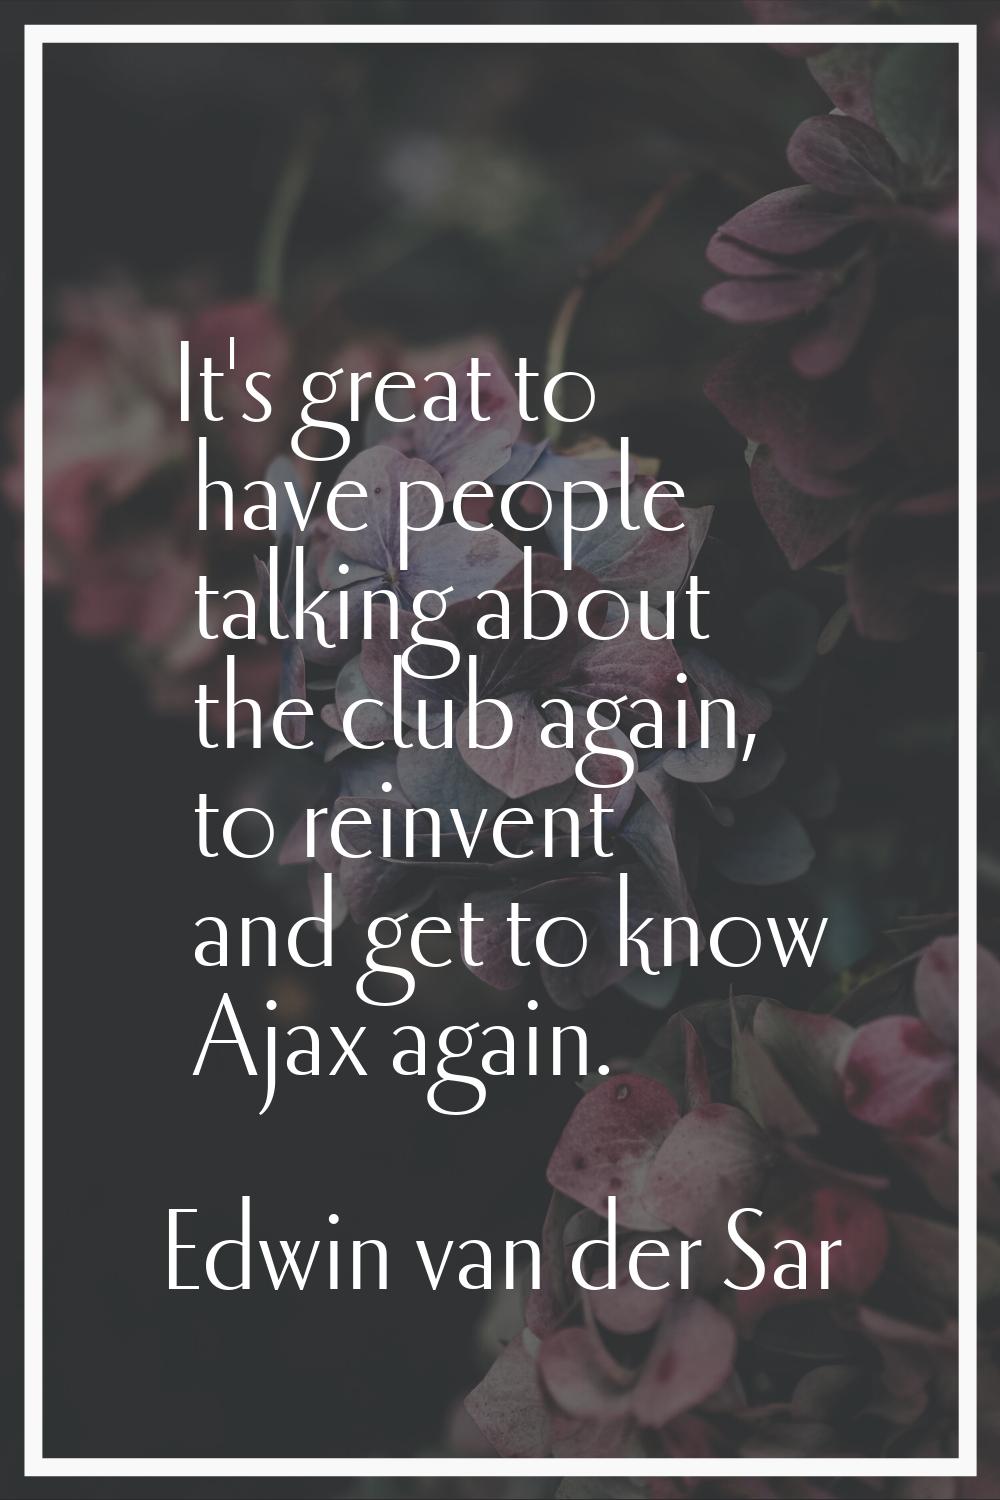 It's great to have people talking about the club again, to reinvent and get to know Ajax again.